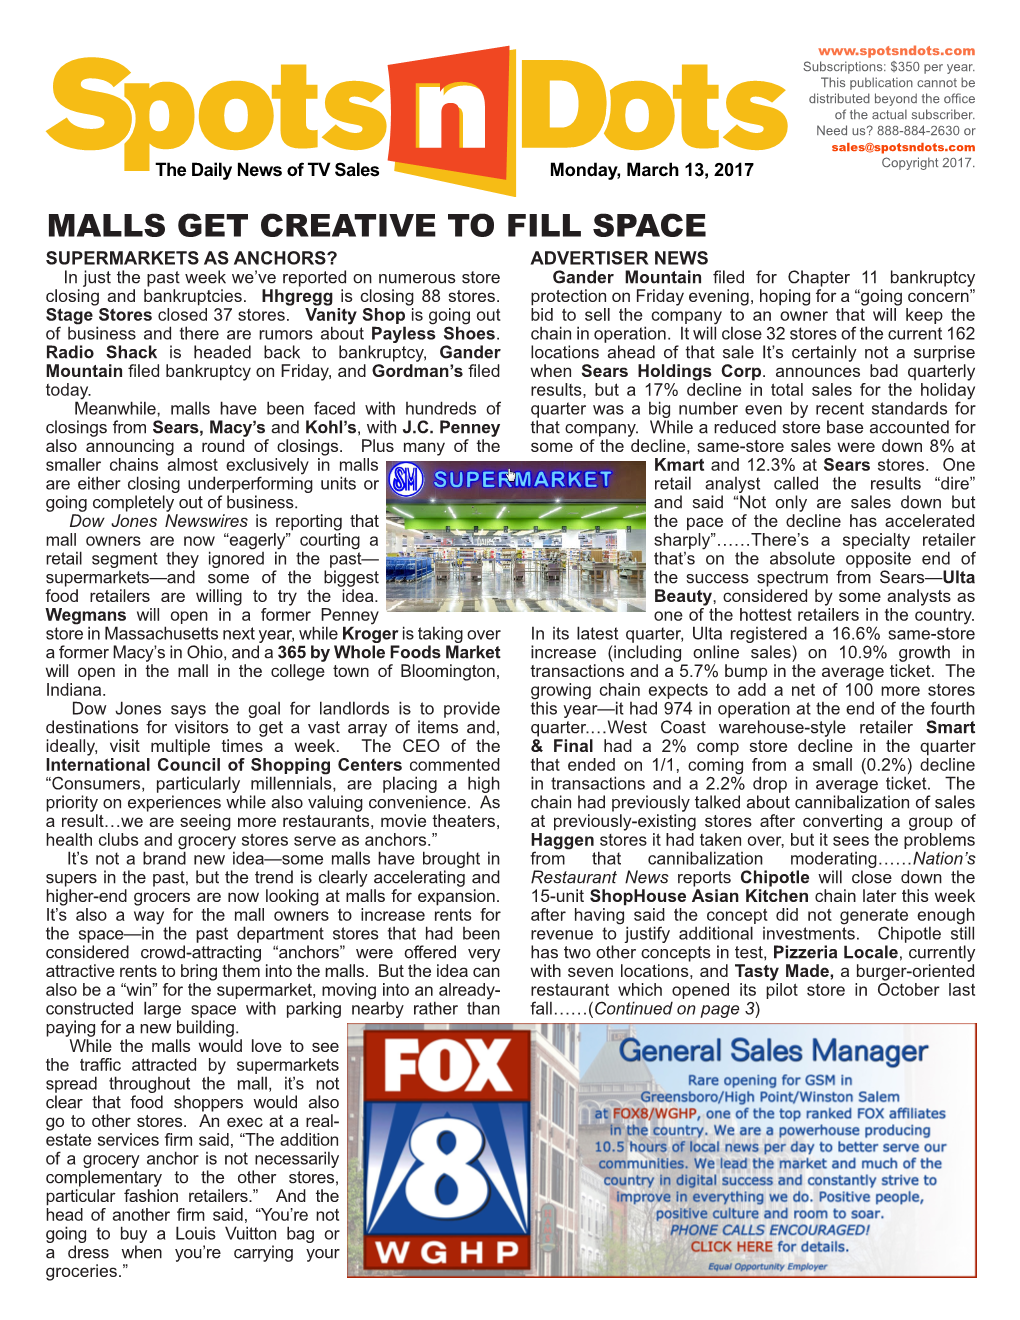 Malls Get Creative to Fill Space